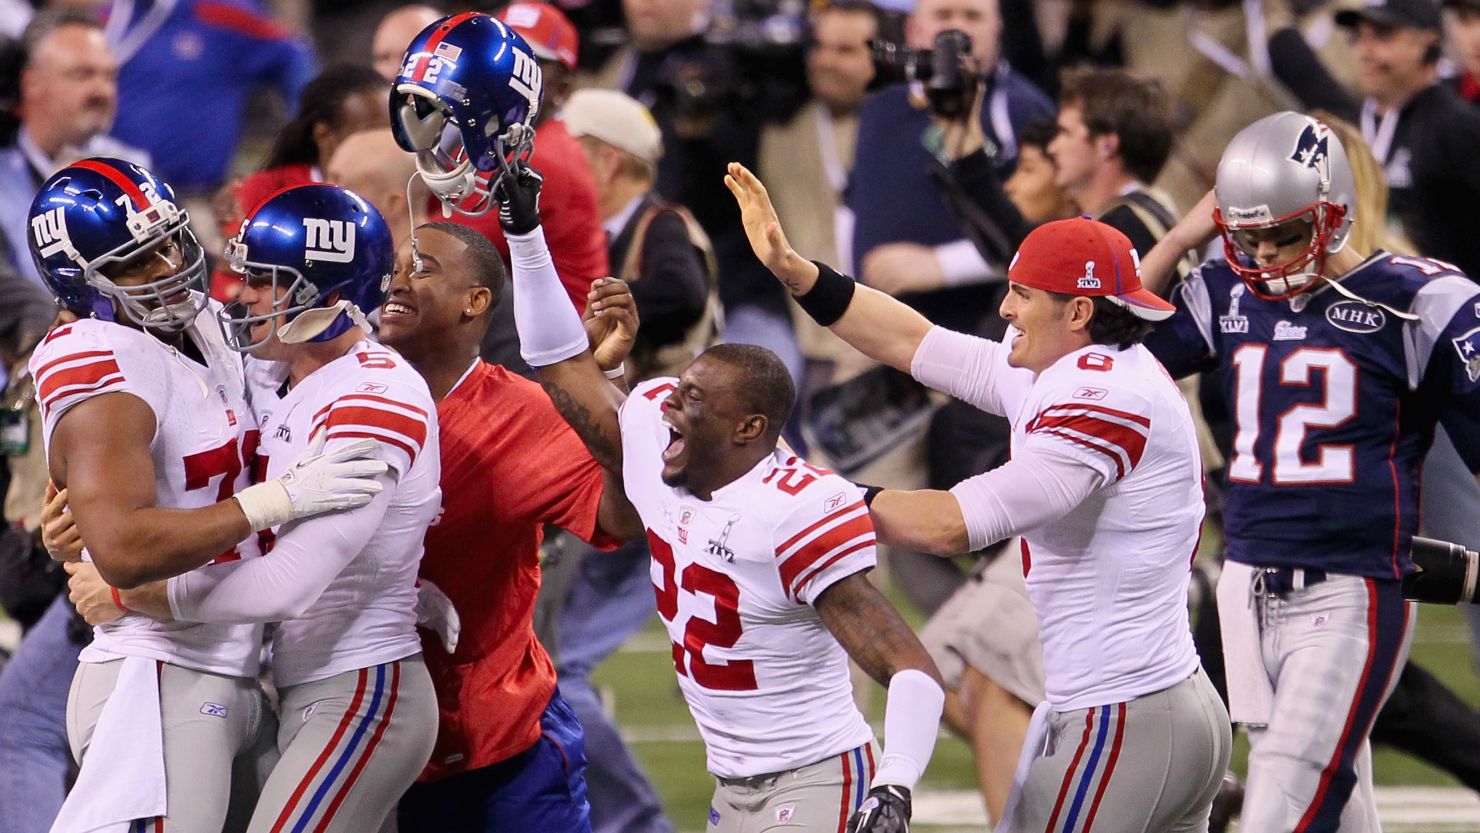 The New York Giants celebrate their 21-17 victory over the New England Patriots in Super Bowl XLVI.